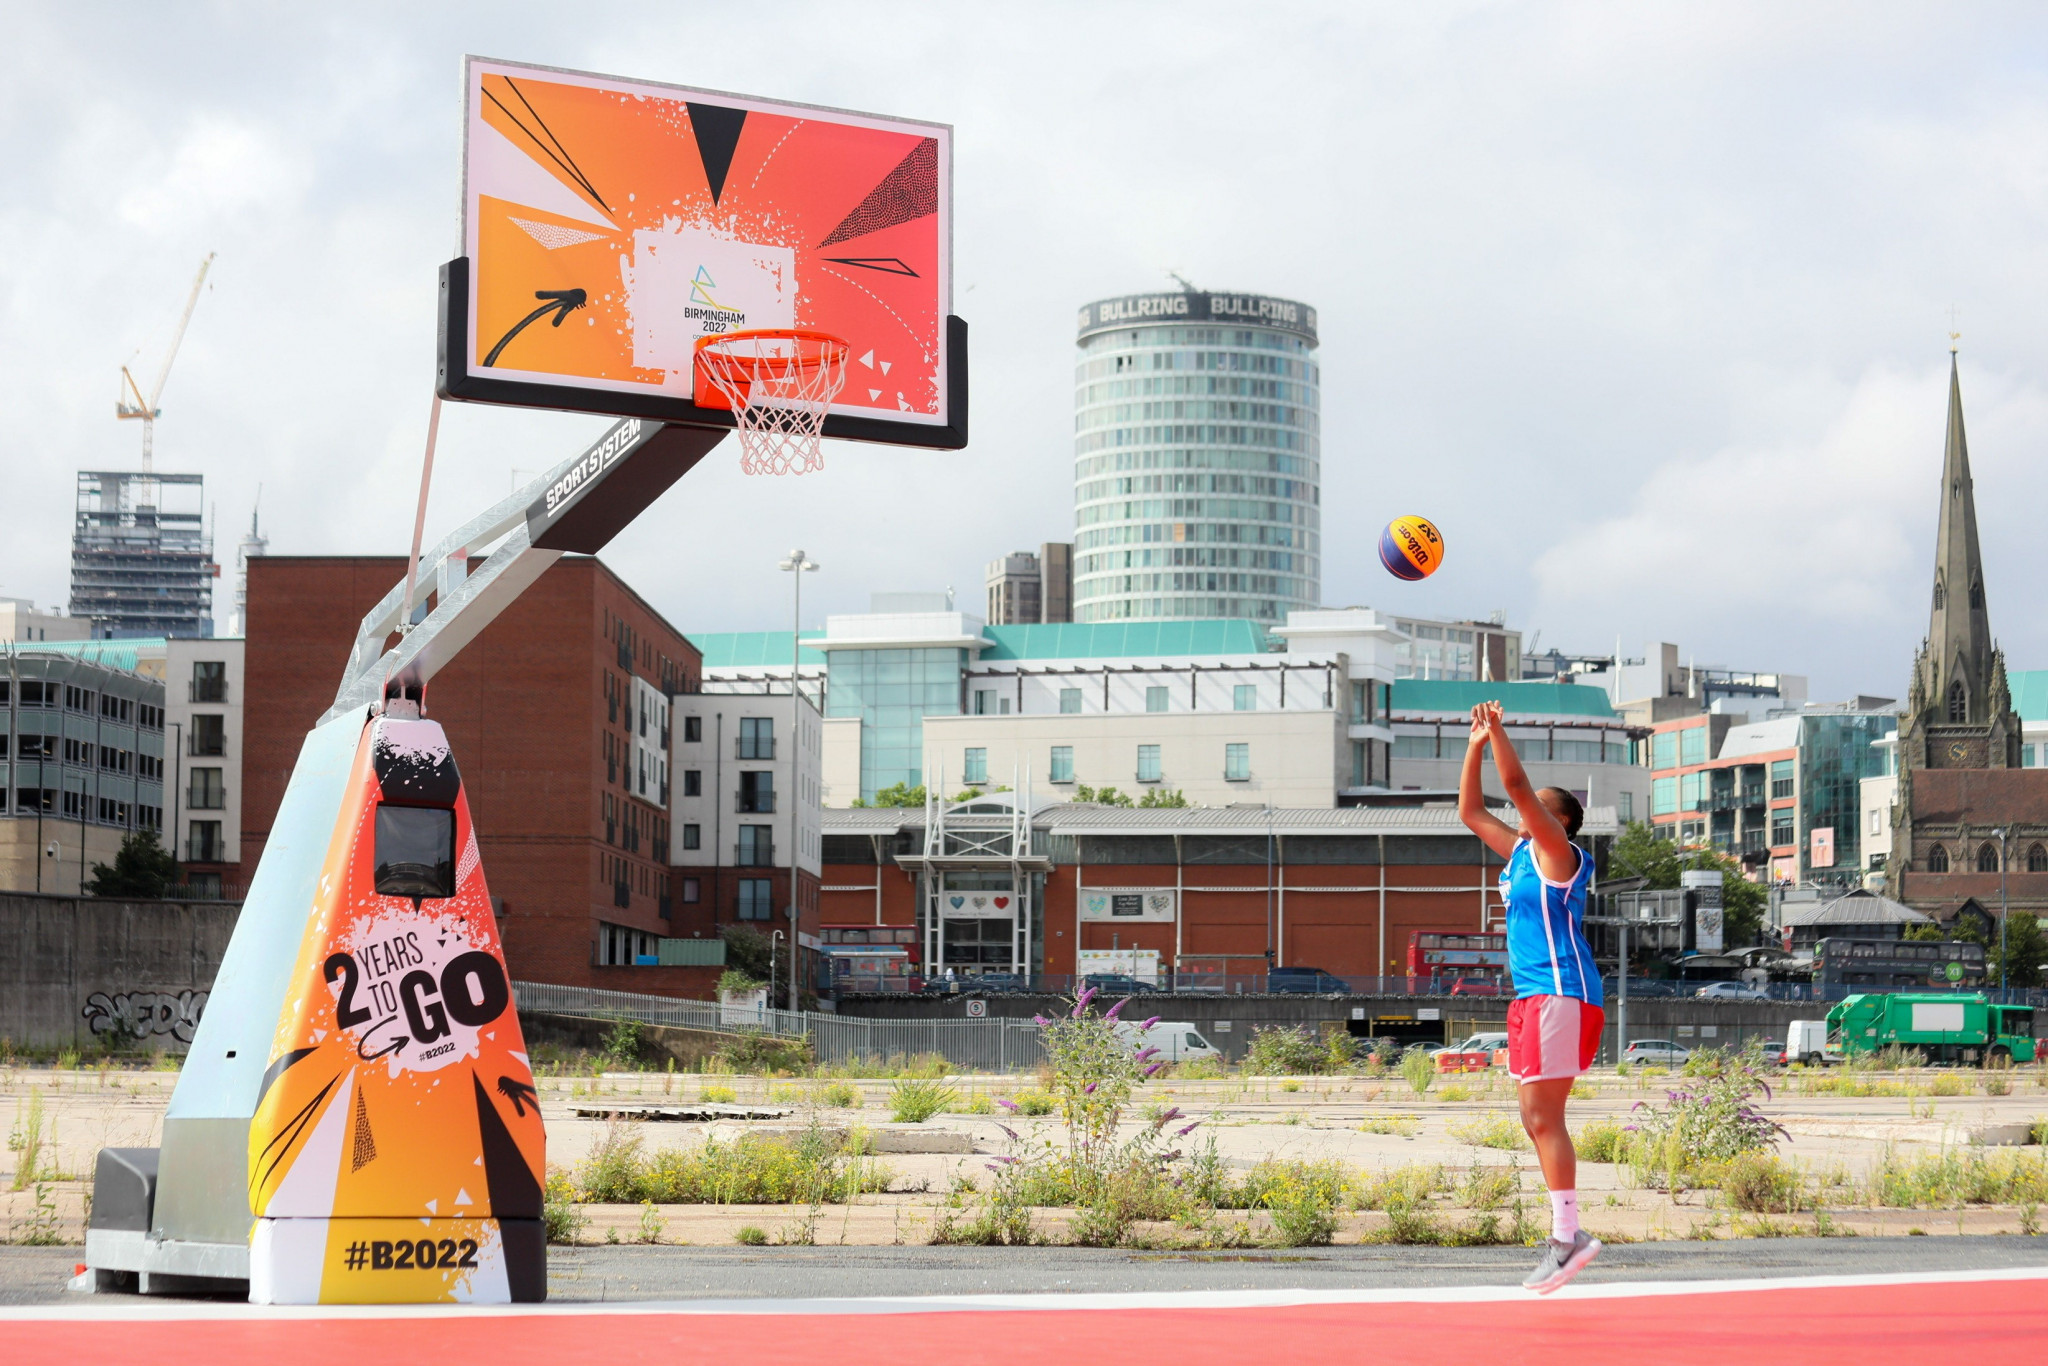 Birmingham 2022 unveiled venues for the 3x3 basketball and beach volleyball events as it celebrated two years to go until the Games ©Birmingham 2022